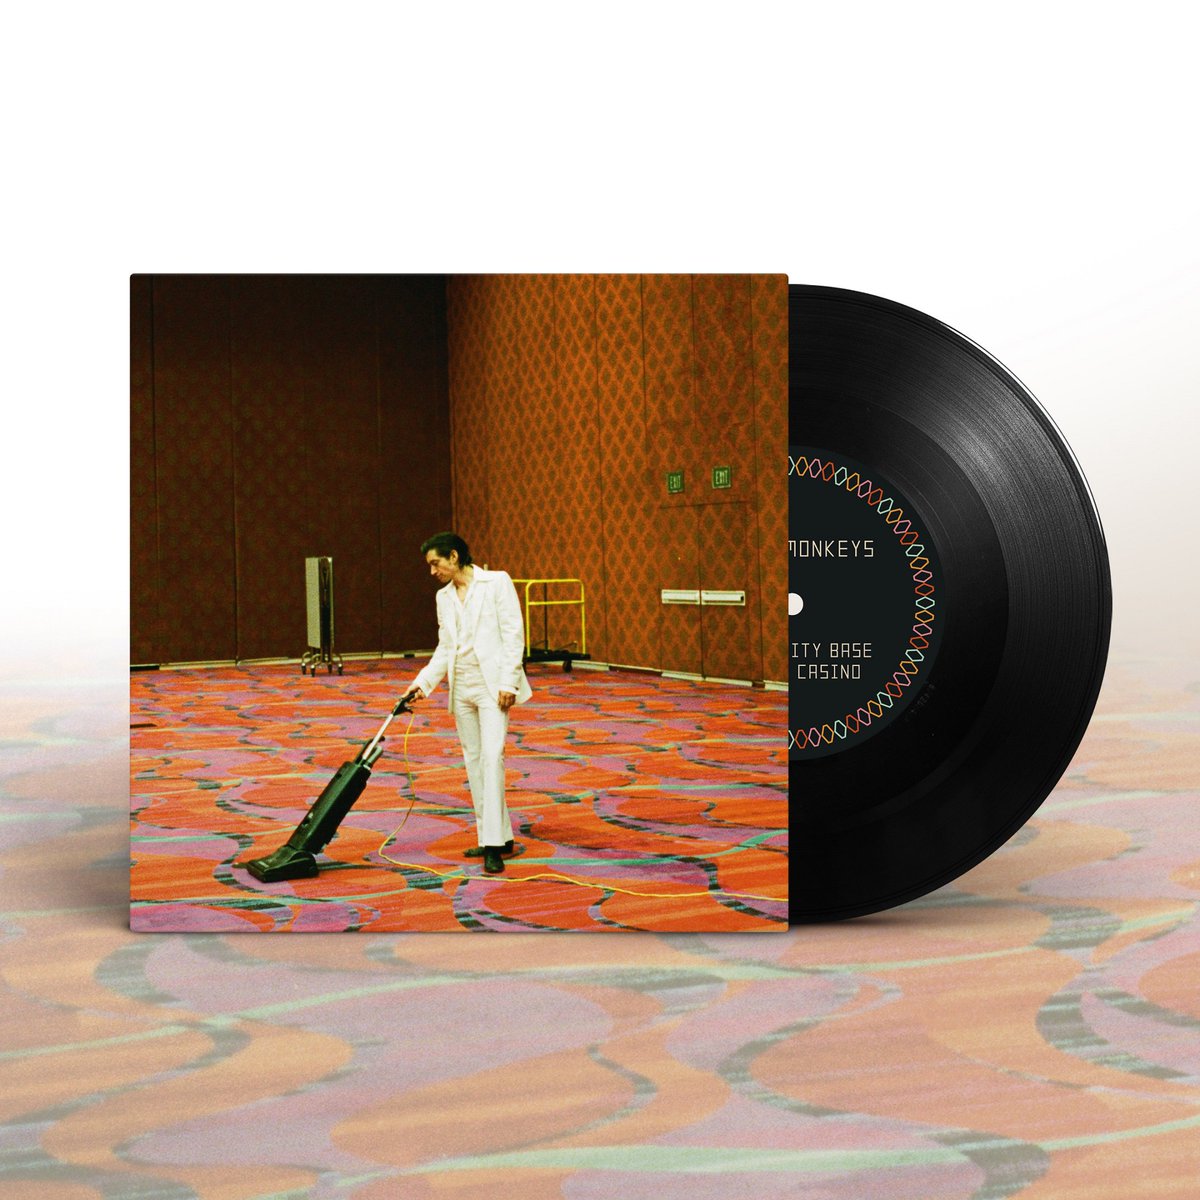 We will release a 'Tranquility Base Hotel & Casino' single 7' on Friday 30th Nov, backed with B Side 'Anyways'. Pre-order: smarturl.it/TBHC7Inch